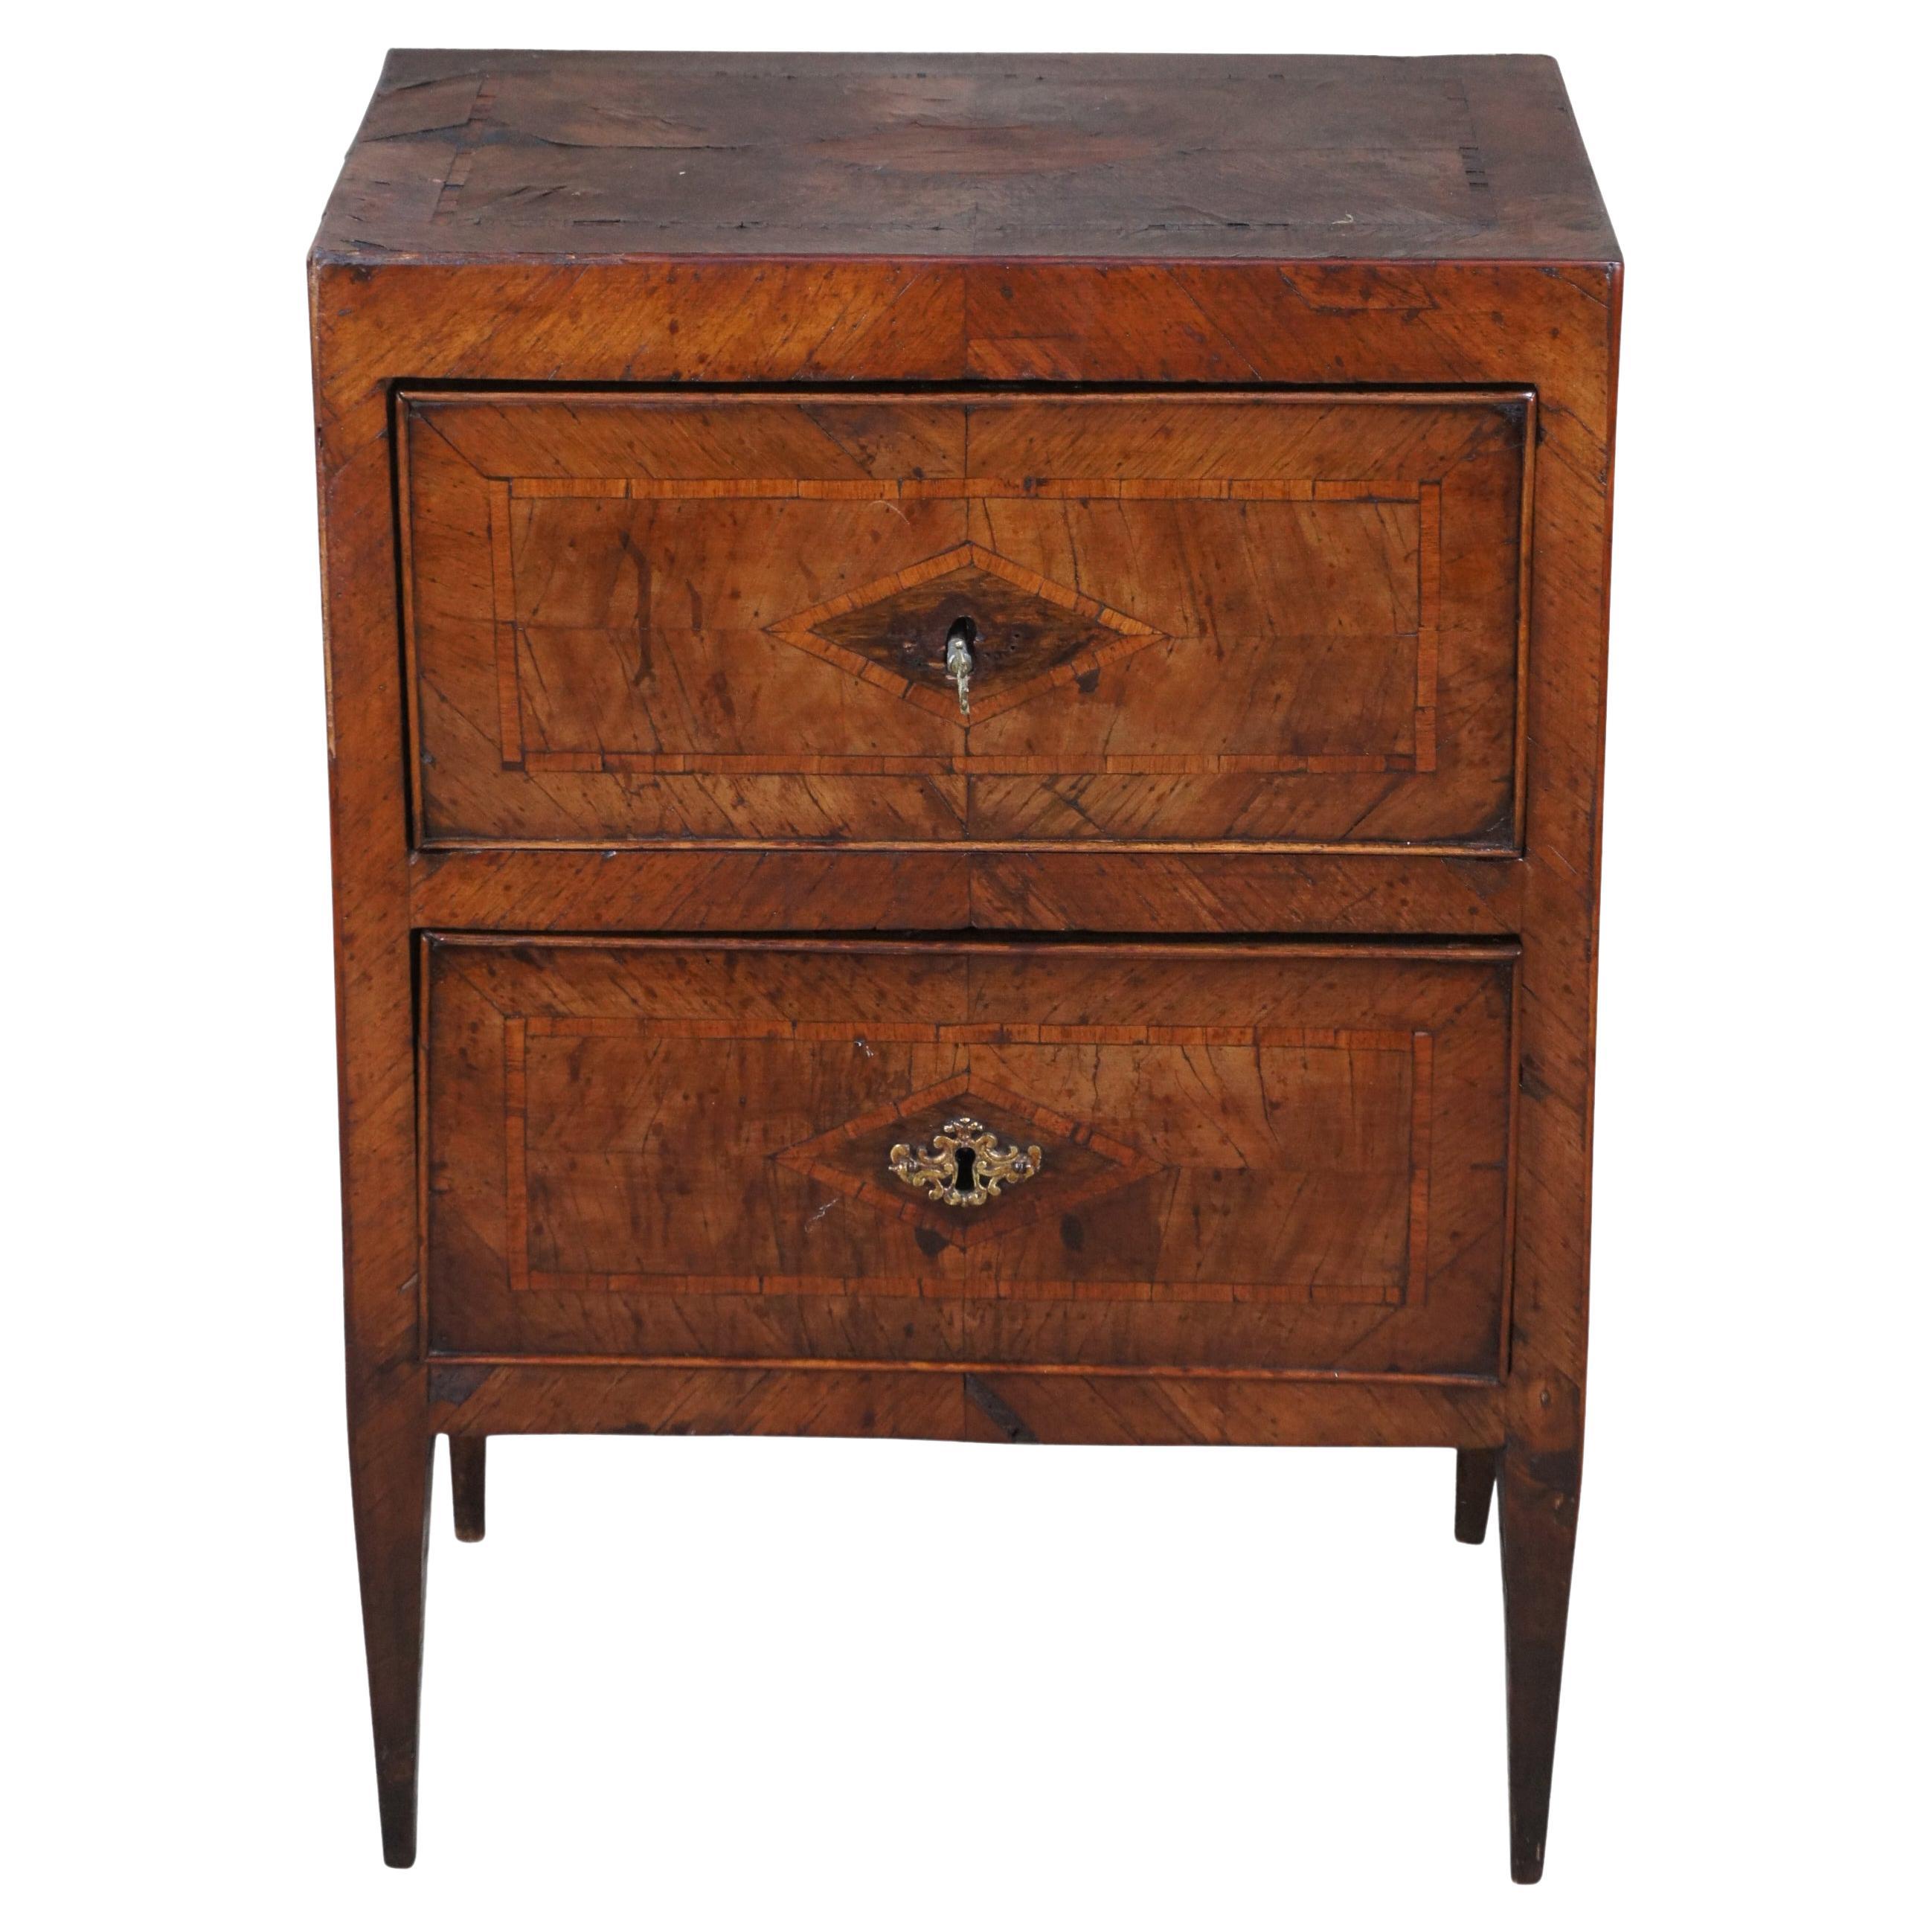 Antique Italian Neoclassical Walnut Bedside Table Commode Nightstand Inlay Chest